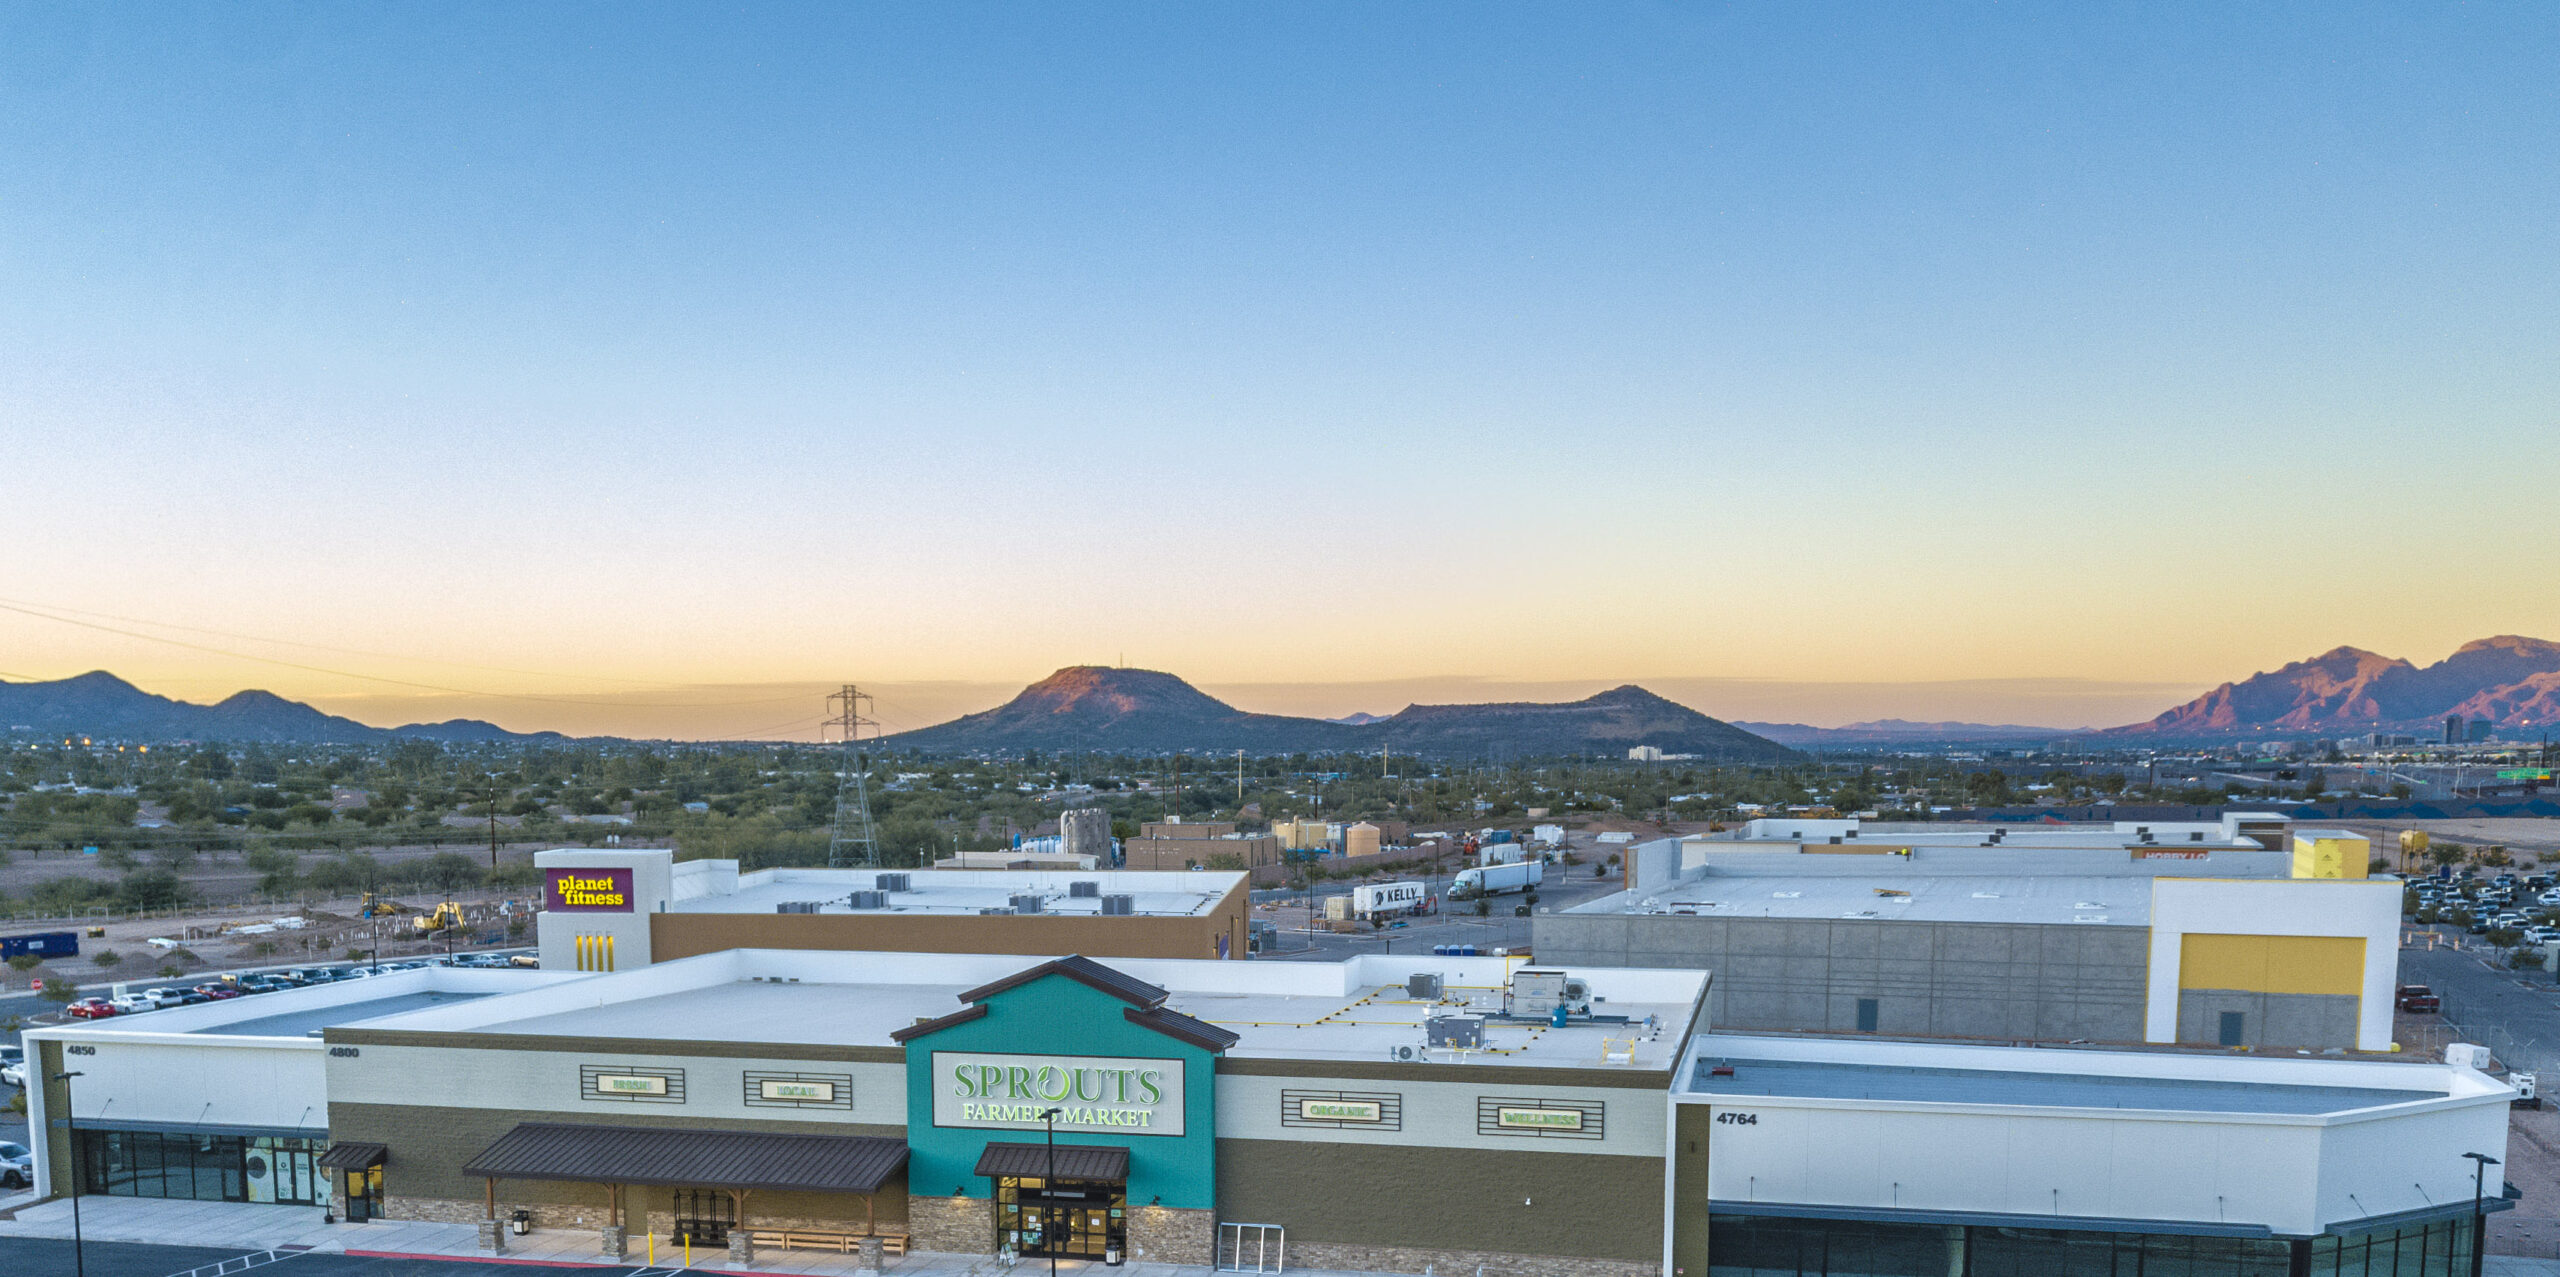 Aerial view of the exterior of Sprouts Farmers Market in Tucson, Arizona.